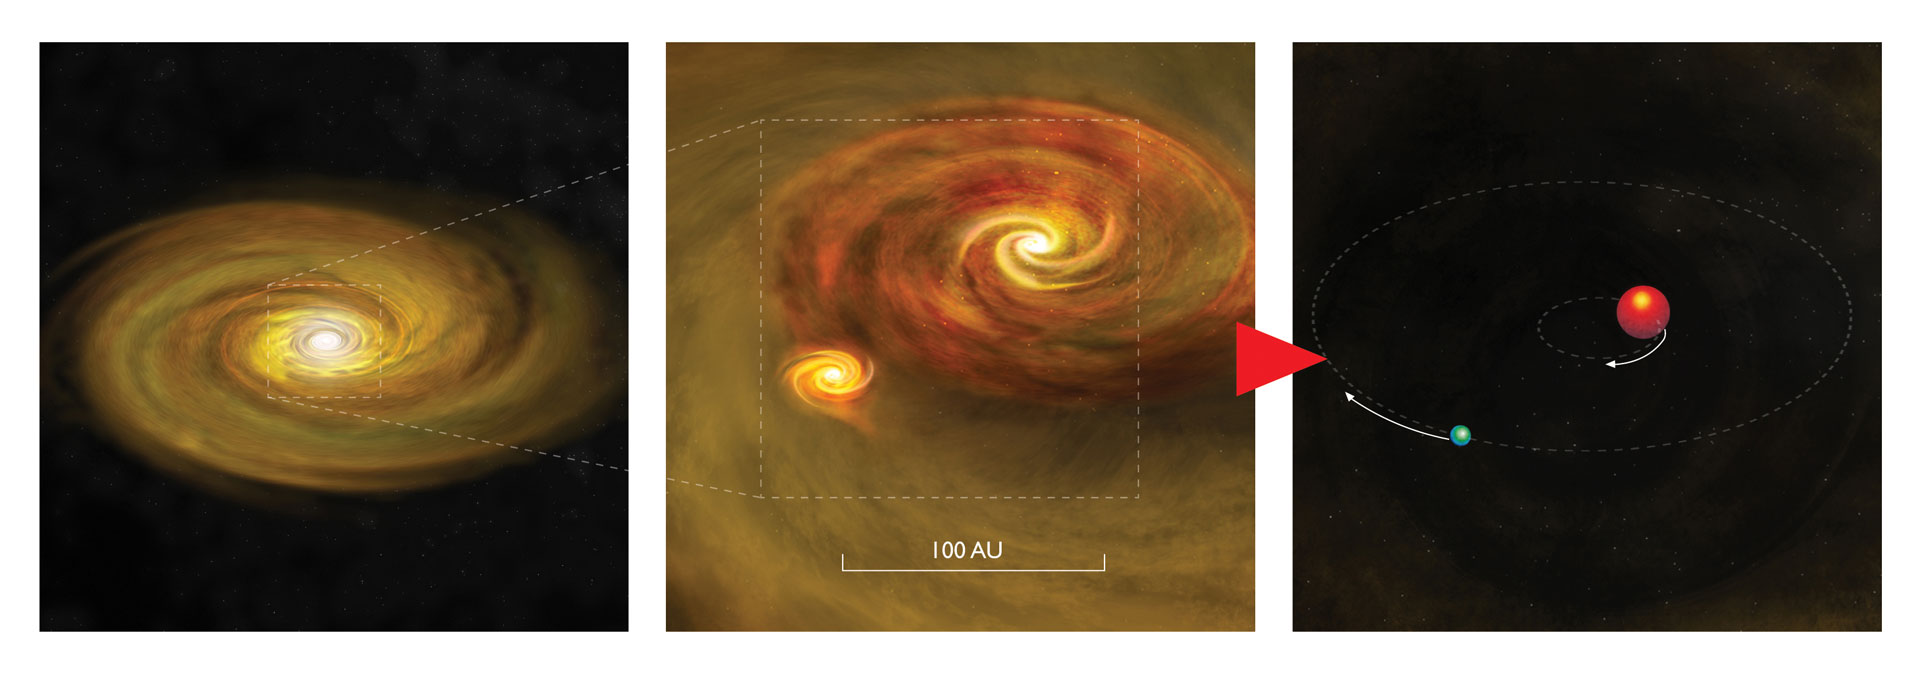 Fragmentation In The Disk: New Studies Give Boost To Binary Star Formation Theory